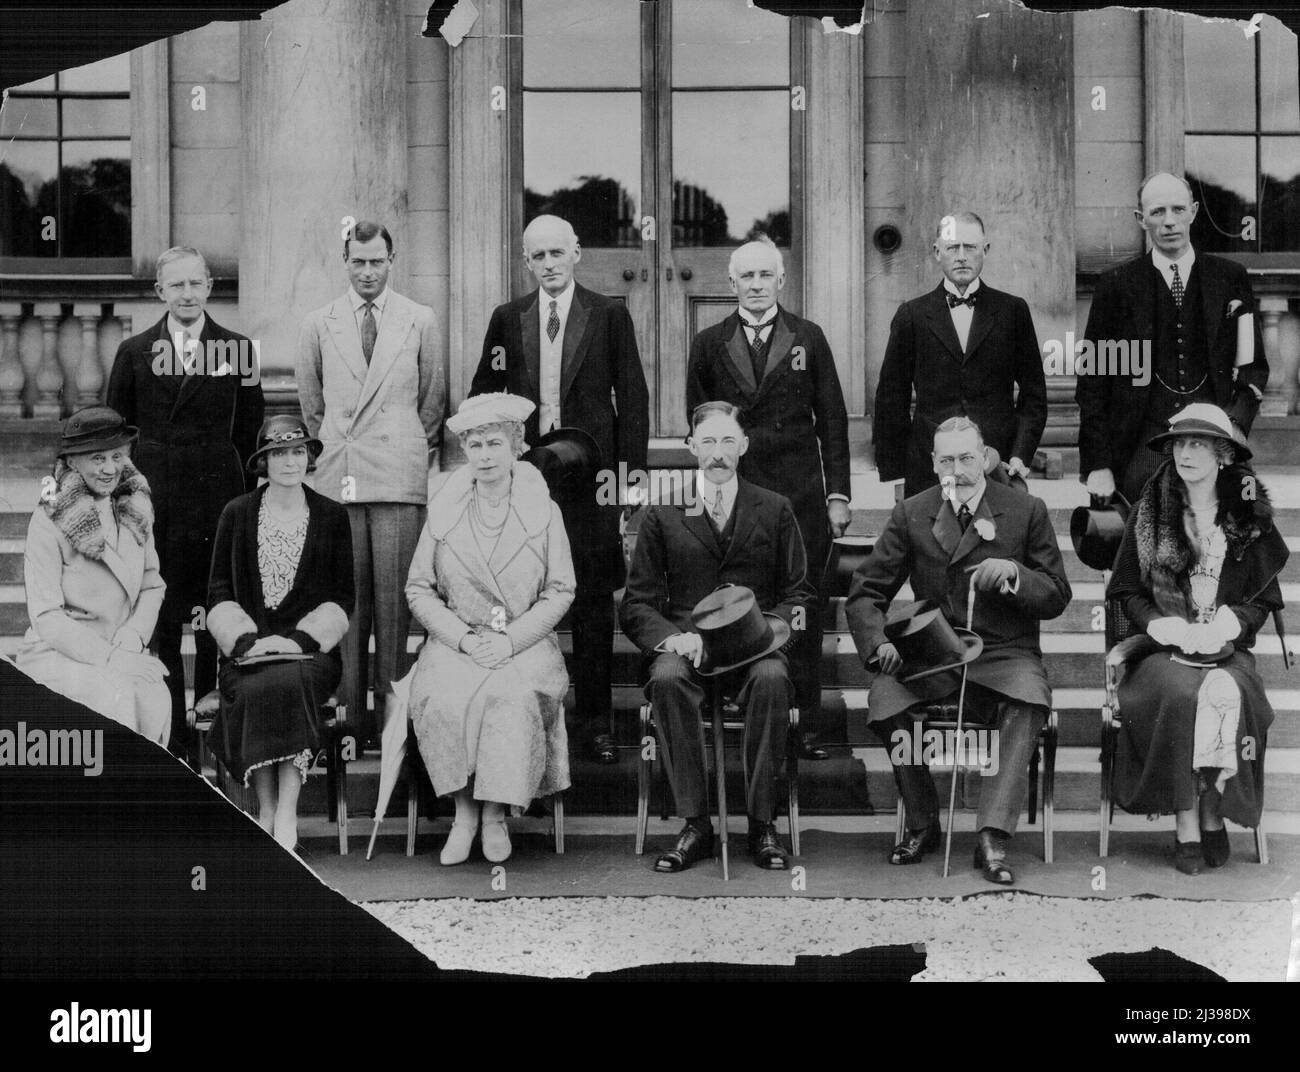 Exclusive Photograph Of Royal House Party At Harewood House, Yorkshire. An exclusive and official photograph taken at Harewood house, during the recent royal visit to Yorkshire. Back Row- left to right - Sir B. Godfrey Faussett, Prince George, Mr. Mitchell (secretary), Sir E. Milton young (Minister in attendance), Sir Guy Graham and Lord Irwin. Front row- left to right- Lady Bertha Dawkins, (Lady-in-waiting), Lady Irwin, H.R.H. Queen Mary, Lord Harewood, H.R.H. King George, and Lady Graham. August 26, 1933. (Photo by Topical Press). Stock Photo